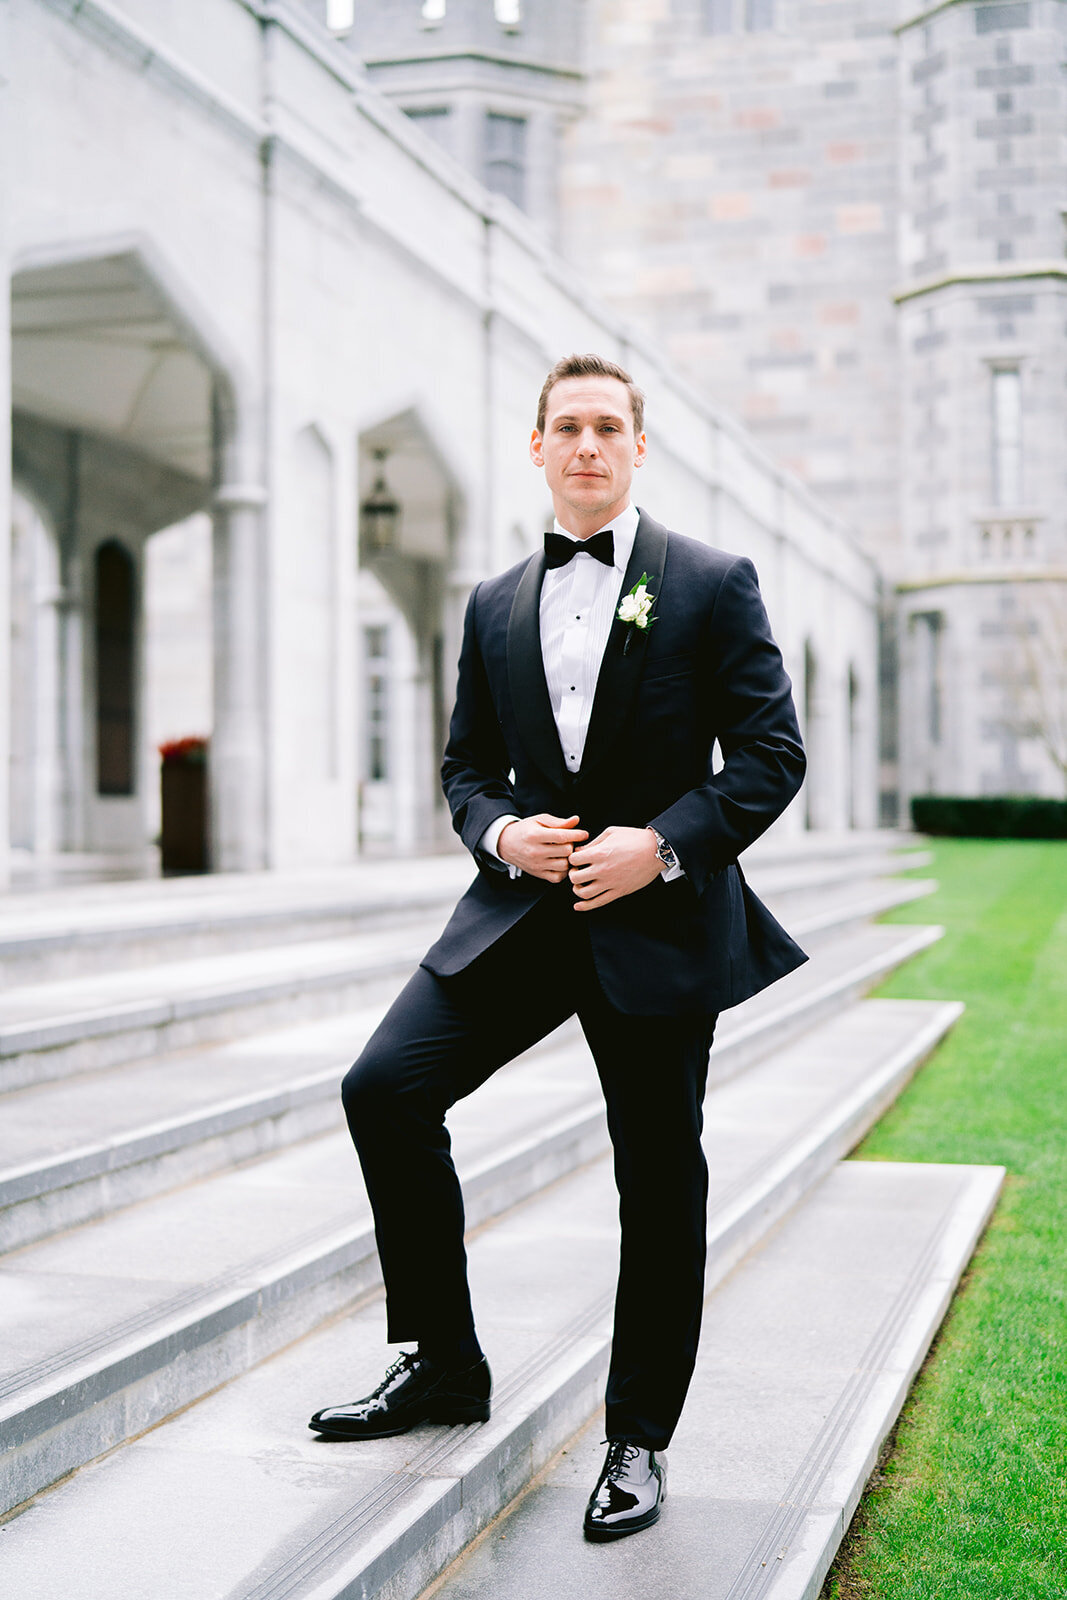 A fine art wedding photograph of the groom looking towards the camera in a Tuxedo outside adare manor